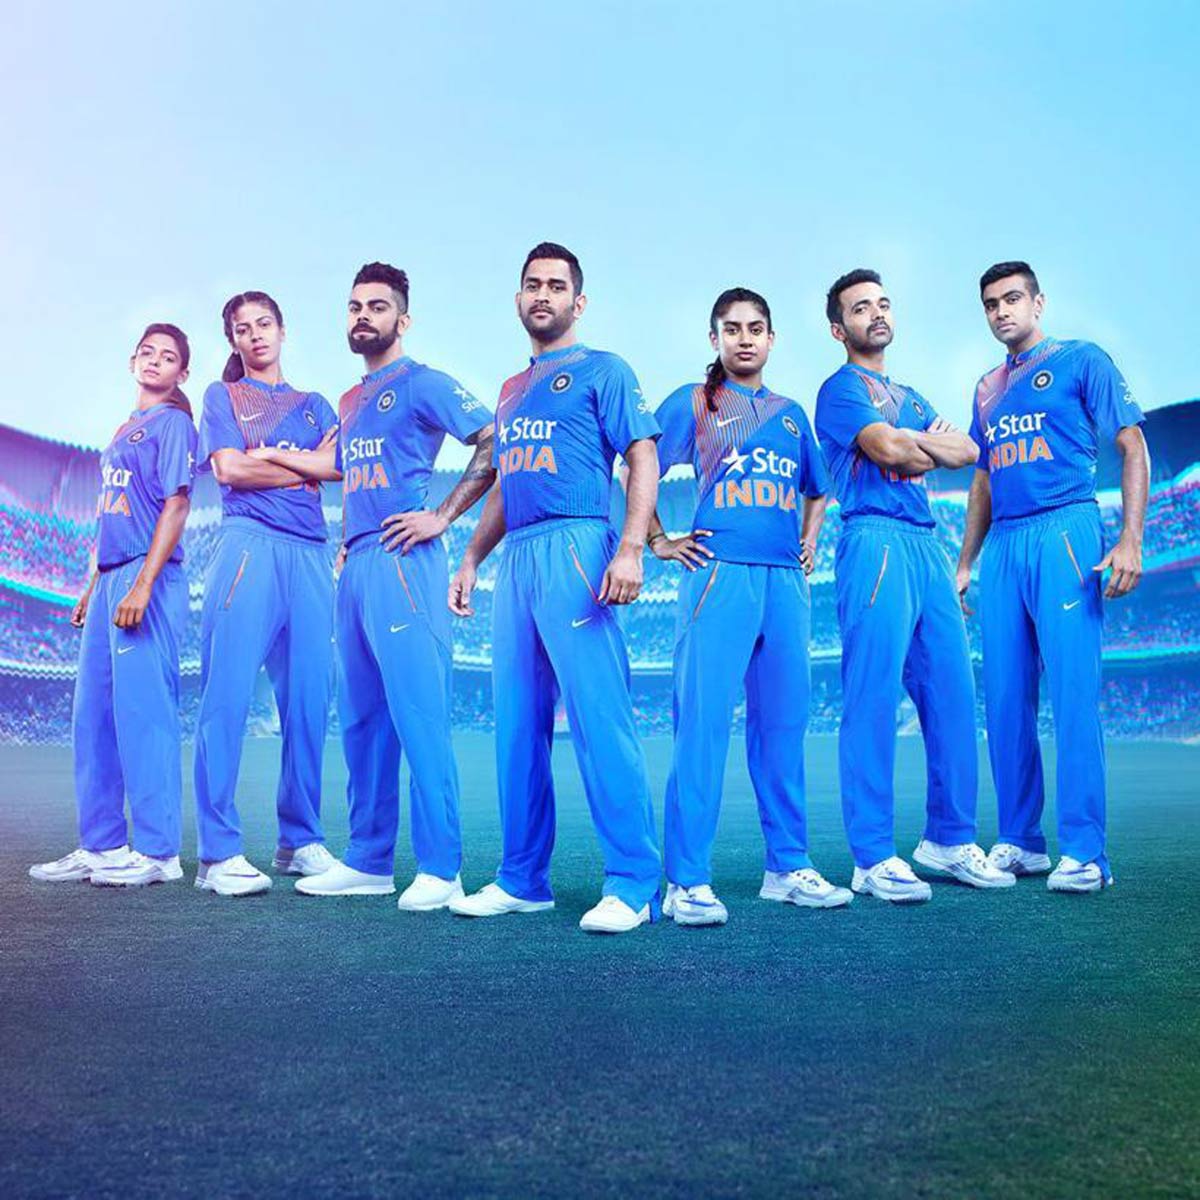 indian cricket team jersey for infants